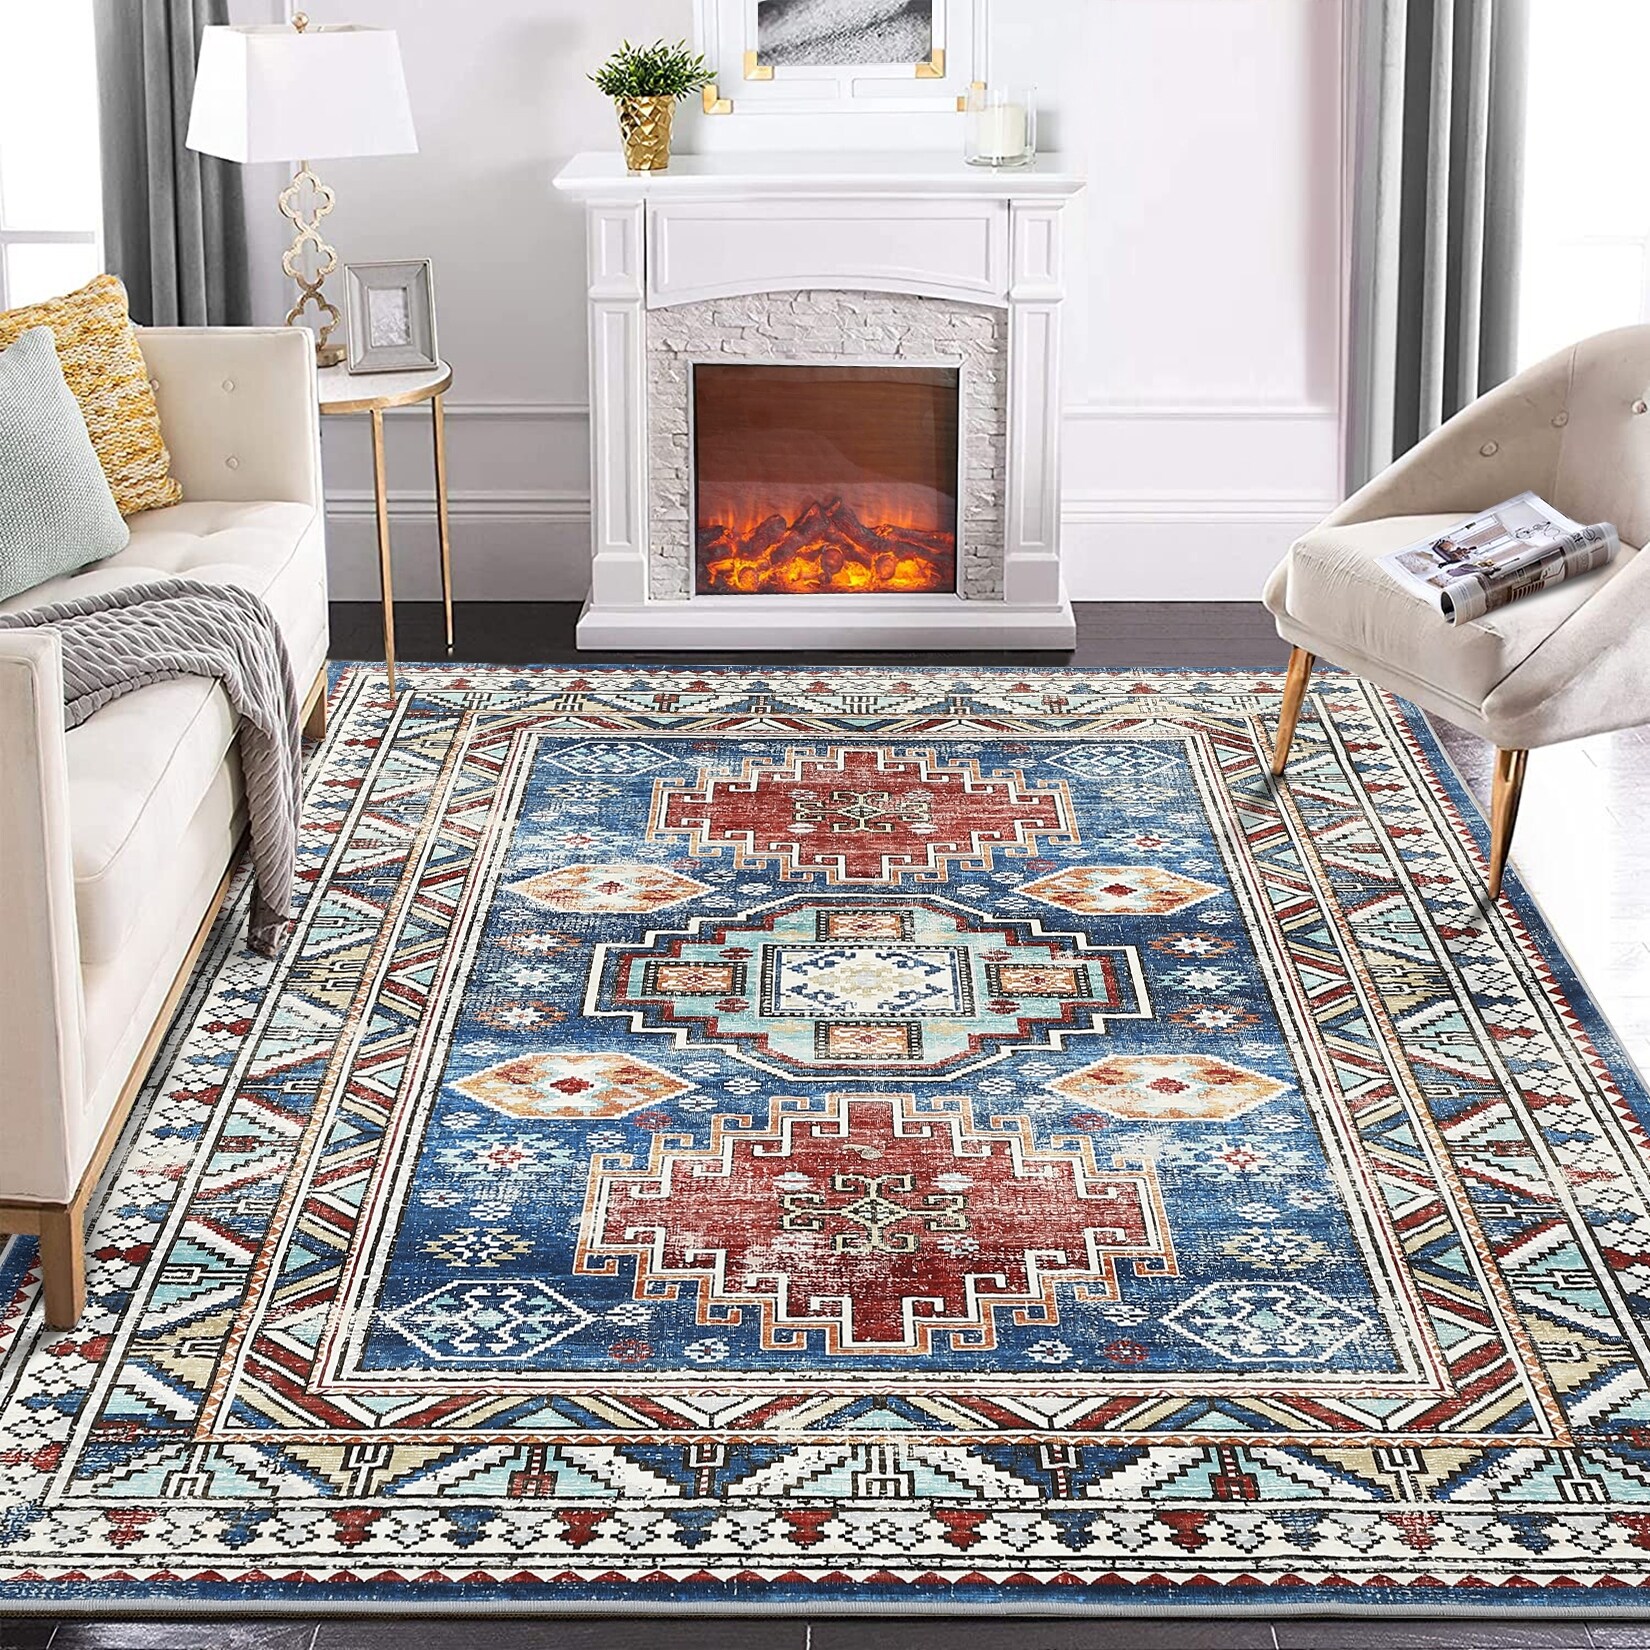 https://ak1.ostkcdn.com/images/products/is/images/direct/d08ade35addefc8a1ecc7ab34de0bcc2d7544ecd/GlowSol-Persian-Rug-Vintage-Oriental-Floral-Printed-Rug-Soft-Floor-Cover.jpg